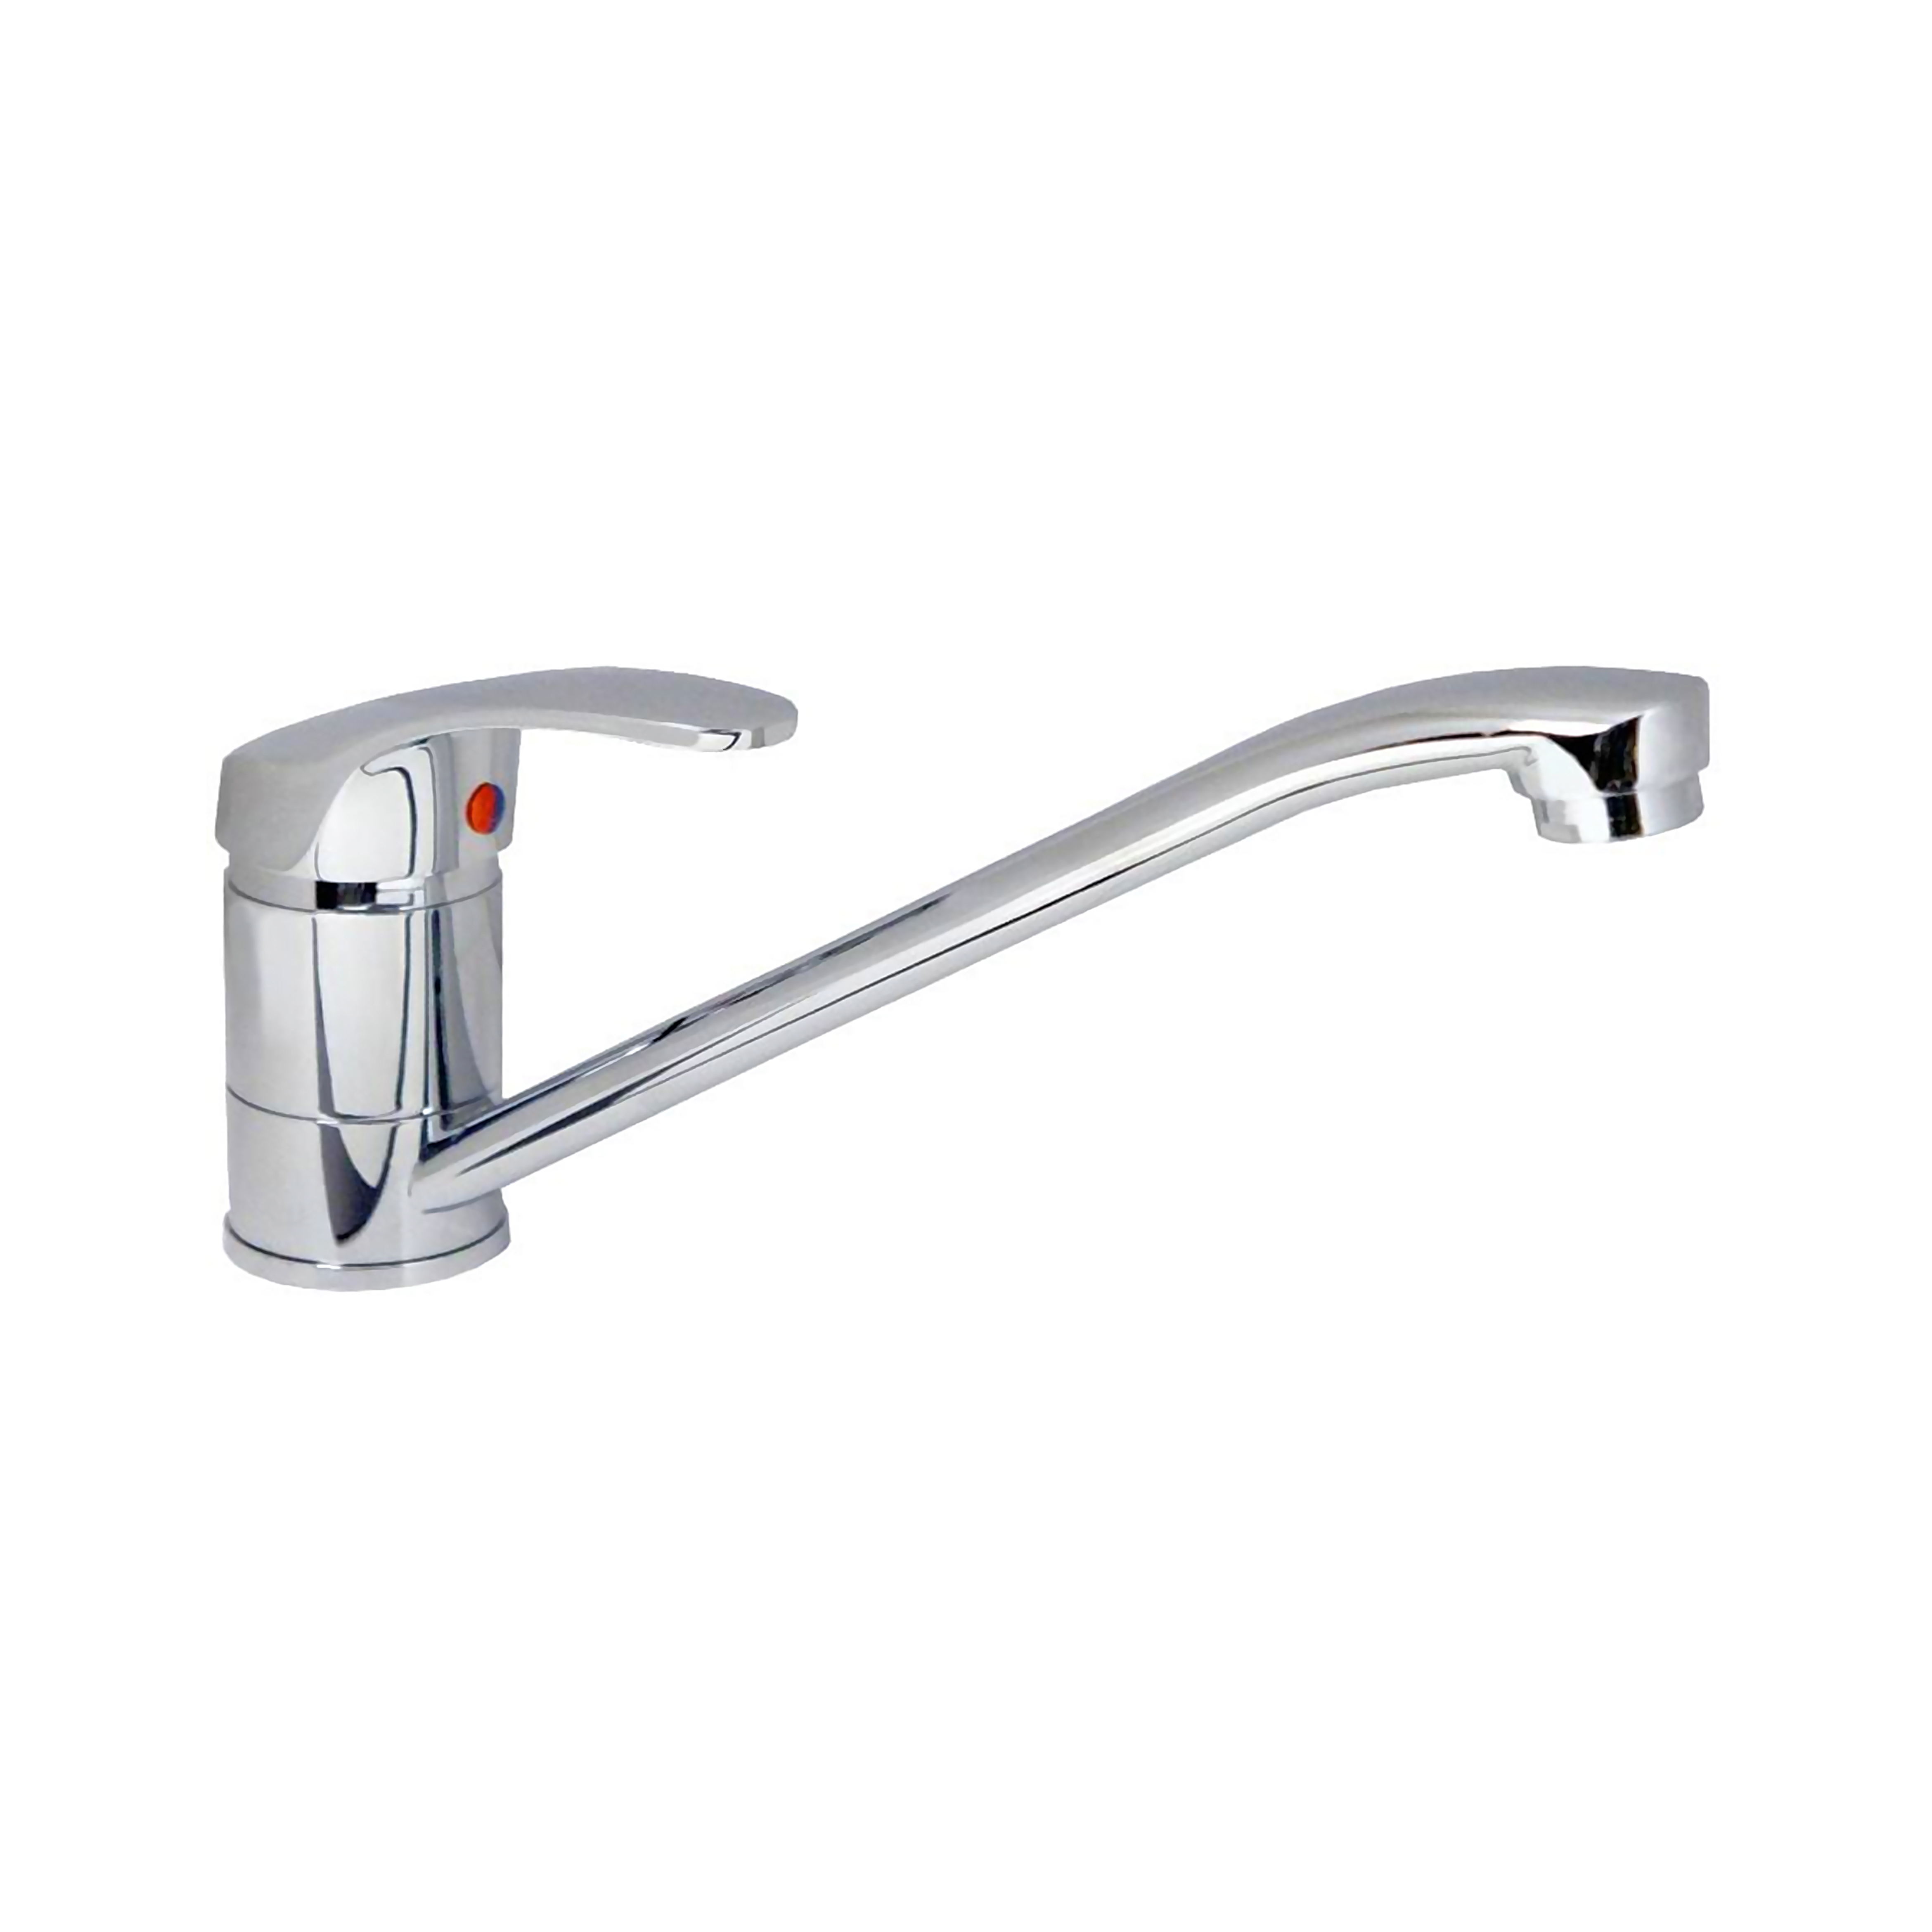 Prism Single Lever Sink Mixer With Swinging SpoutTable Mounted 1 